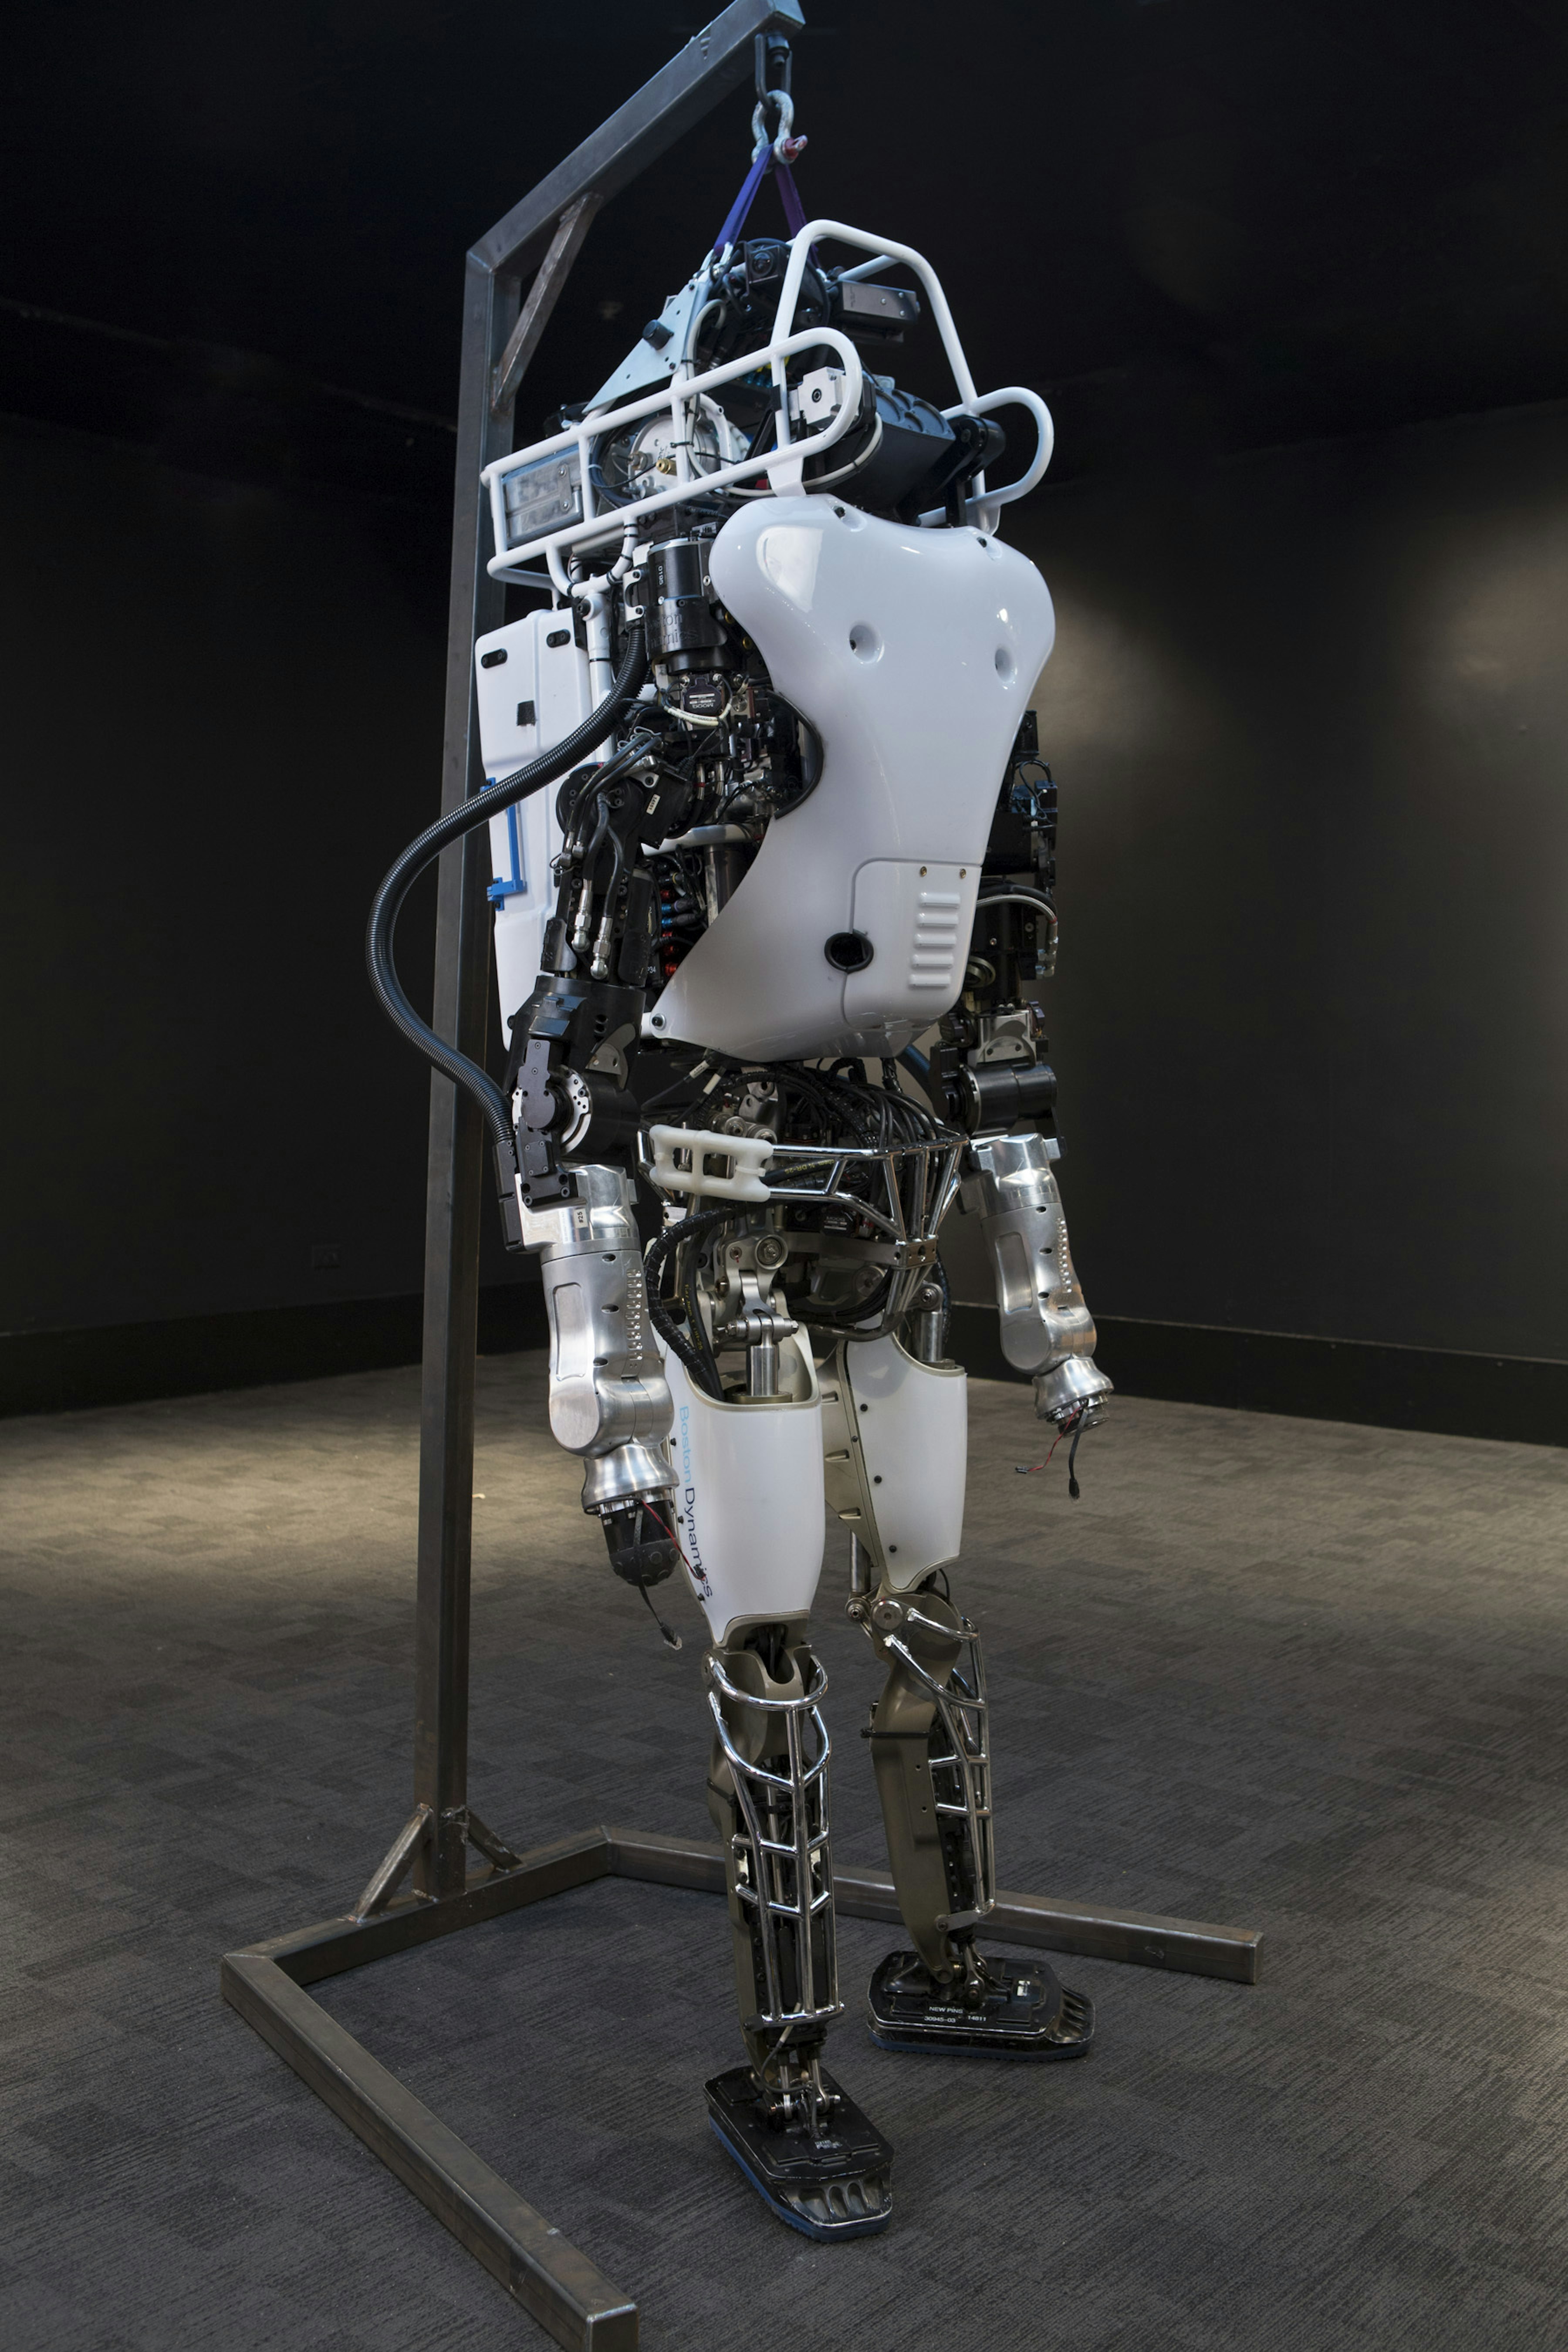 Darpas Insane Robots Take Over Chicagos Museum Of Science And